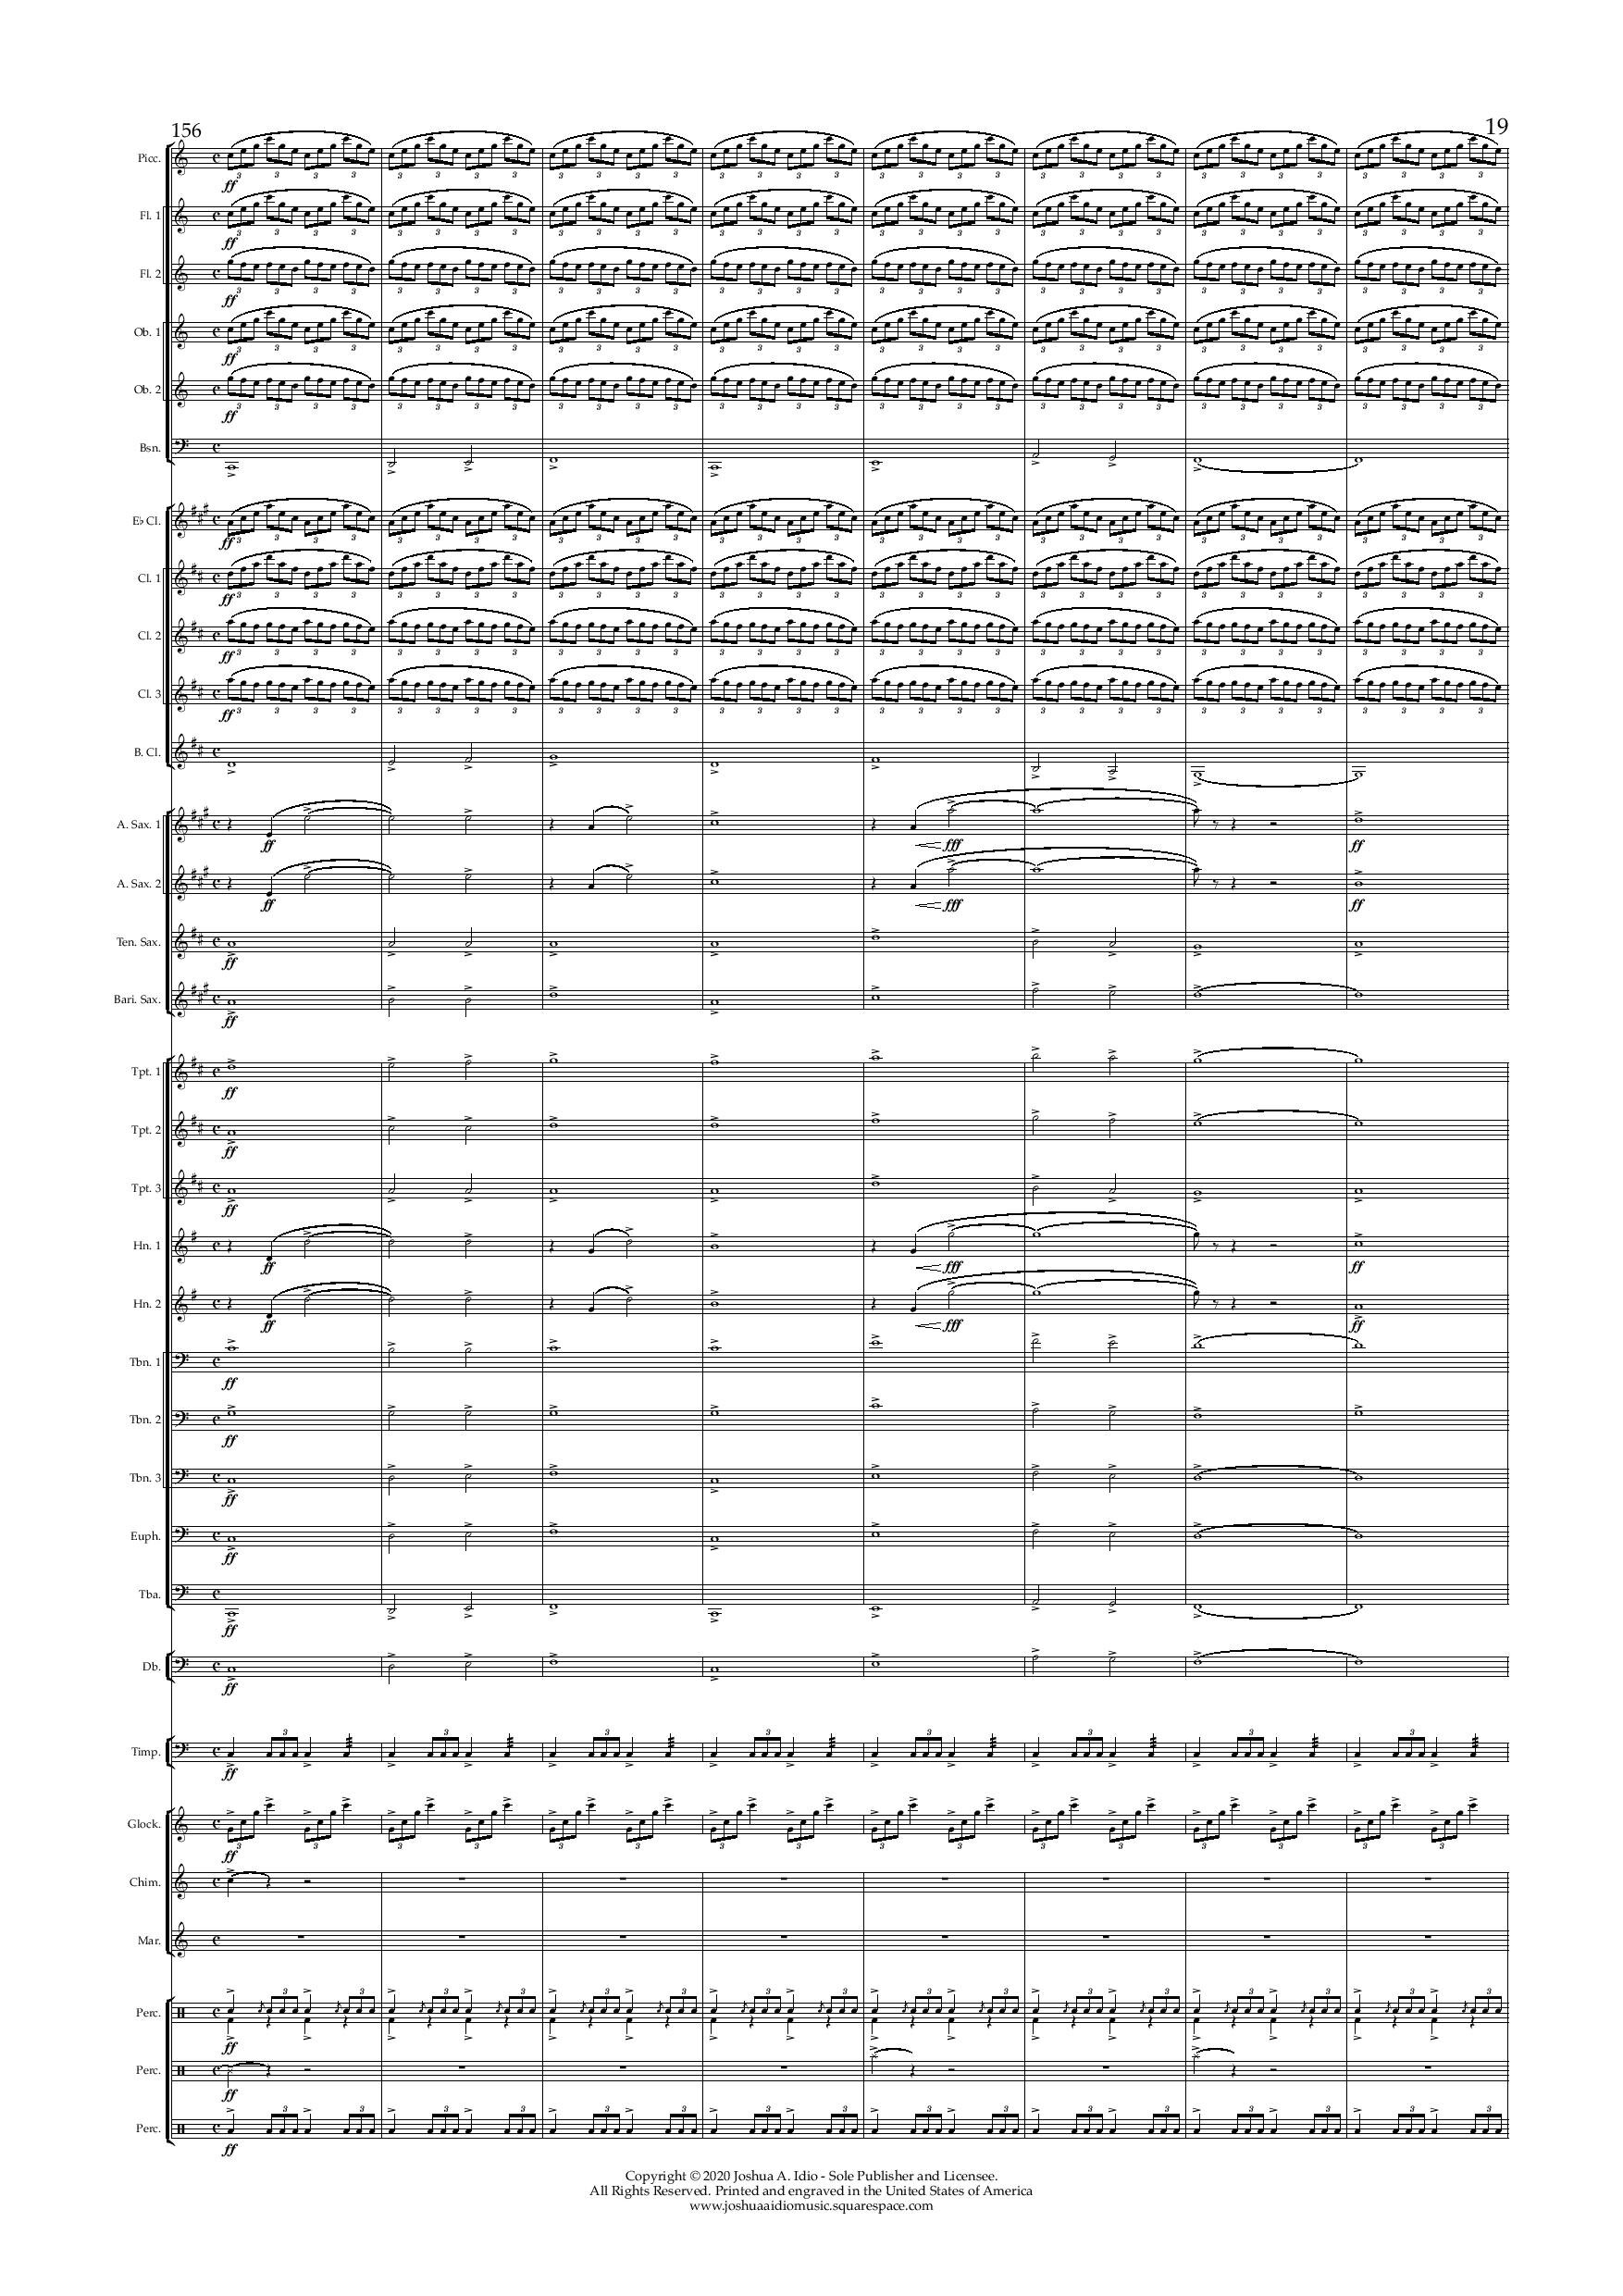 The Cruise Line Dream - Conductor s Score-page-019.jpg